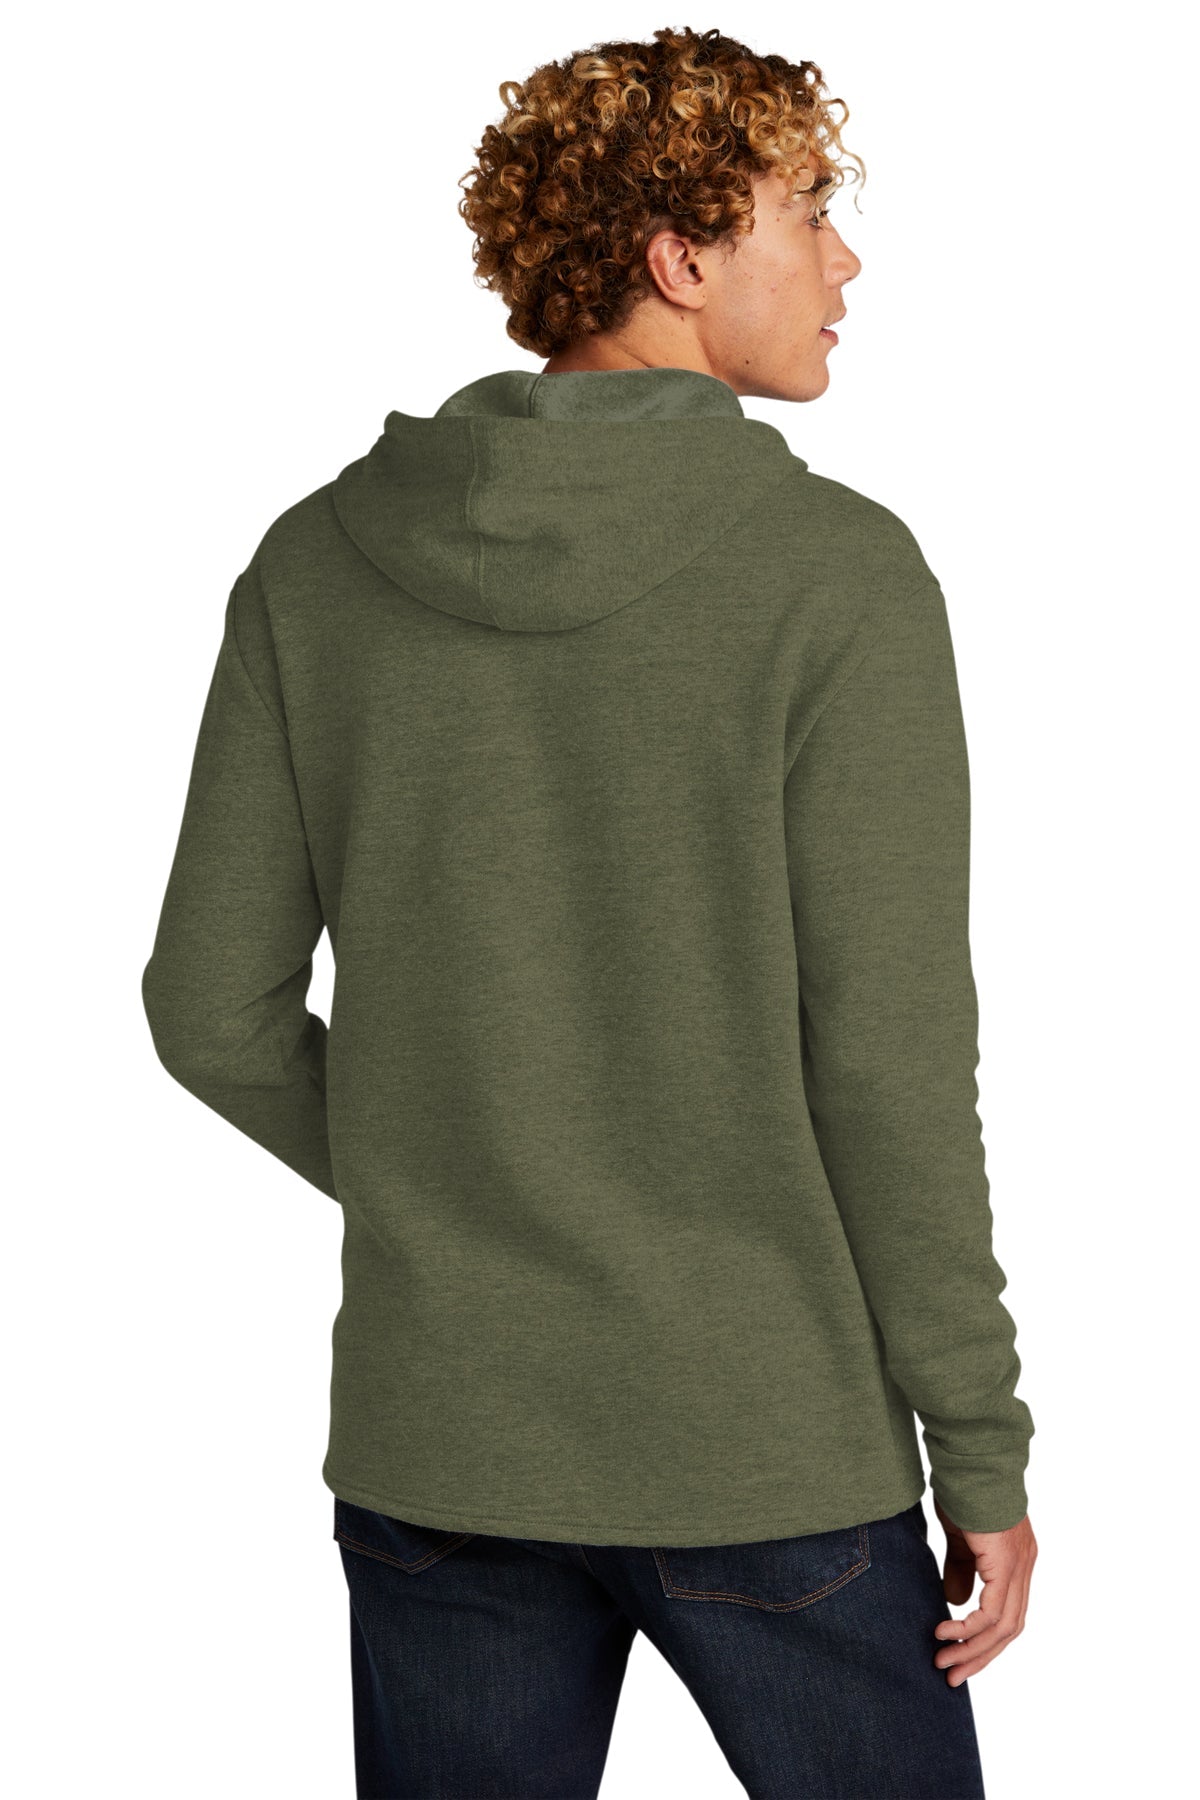 Next Level Unisex PCH Fleece Pullover Hoodie NL9300 Heather Military Green